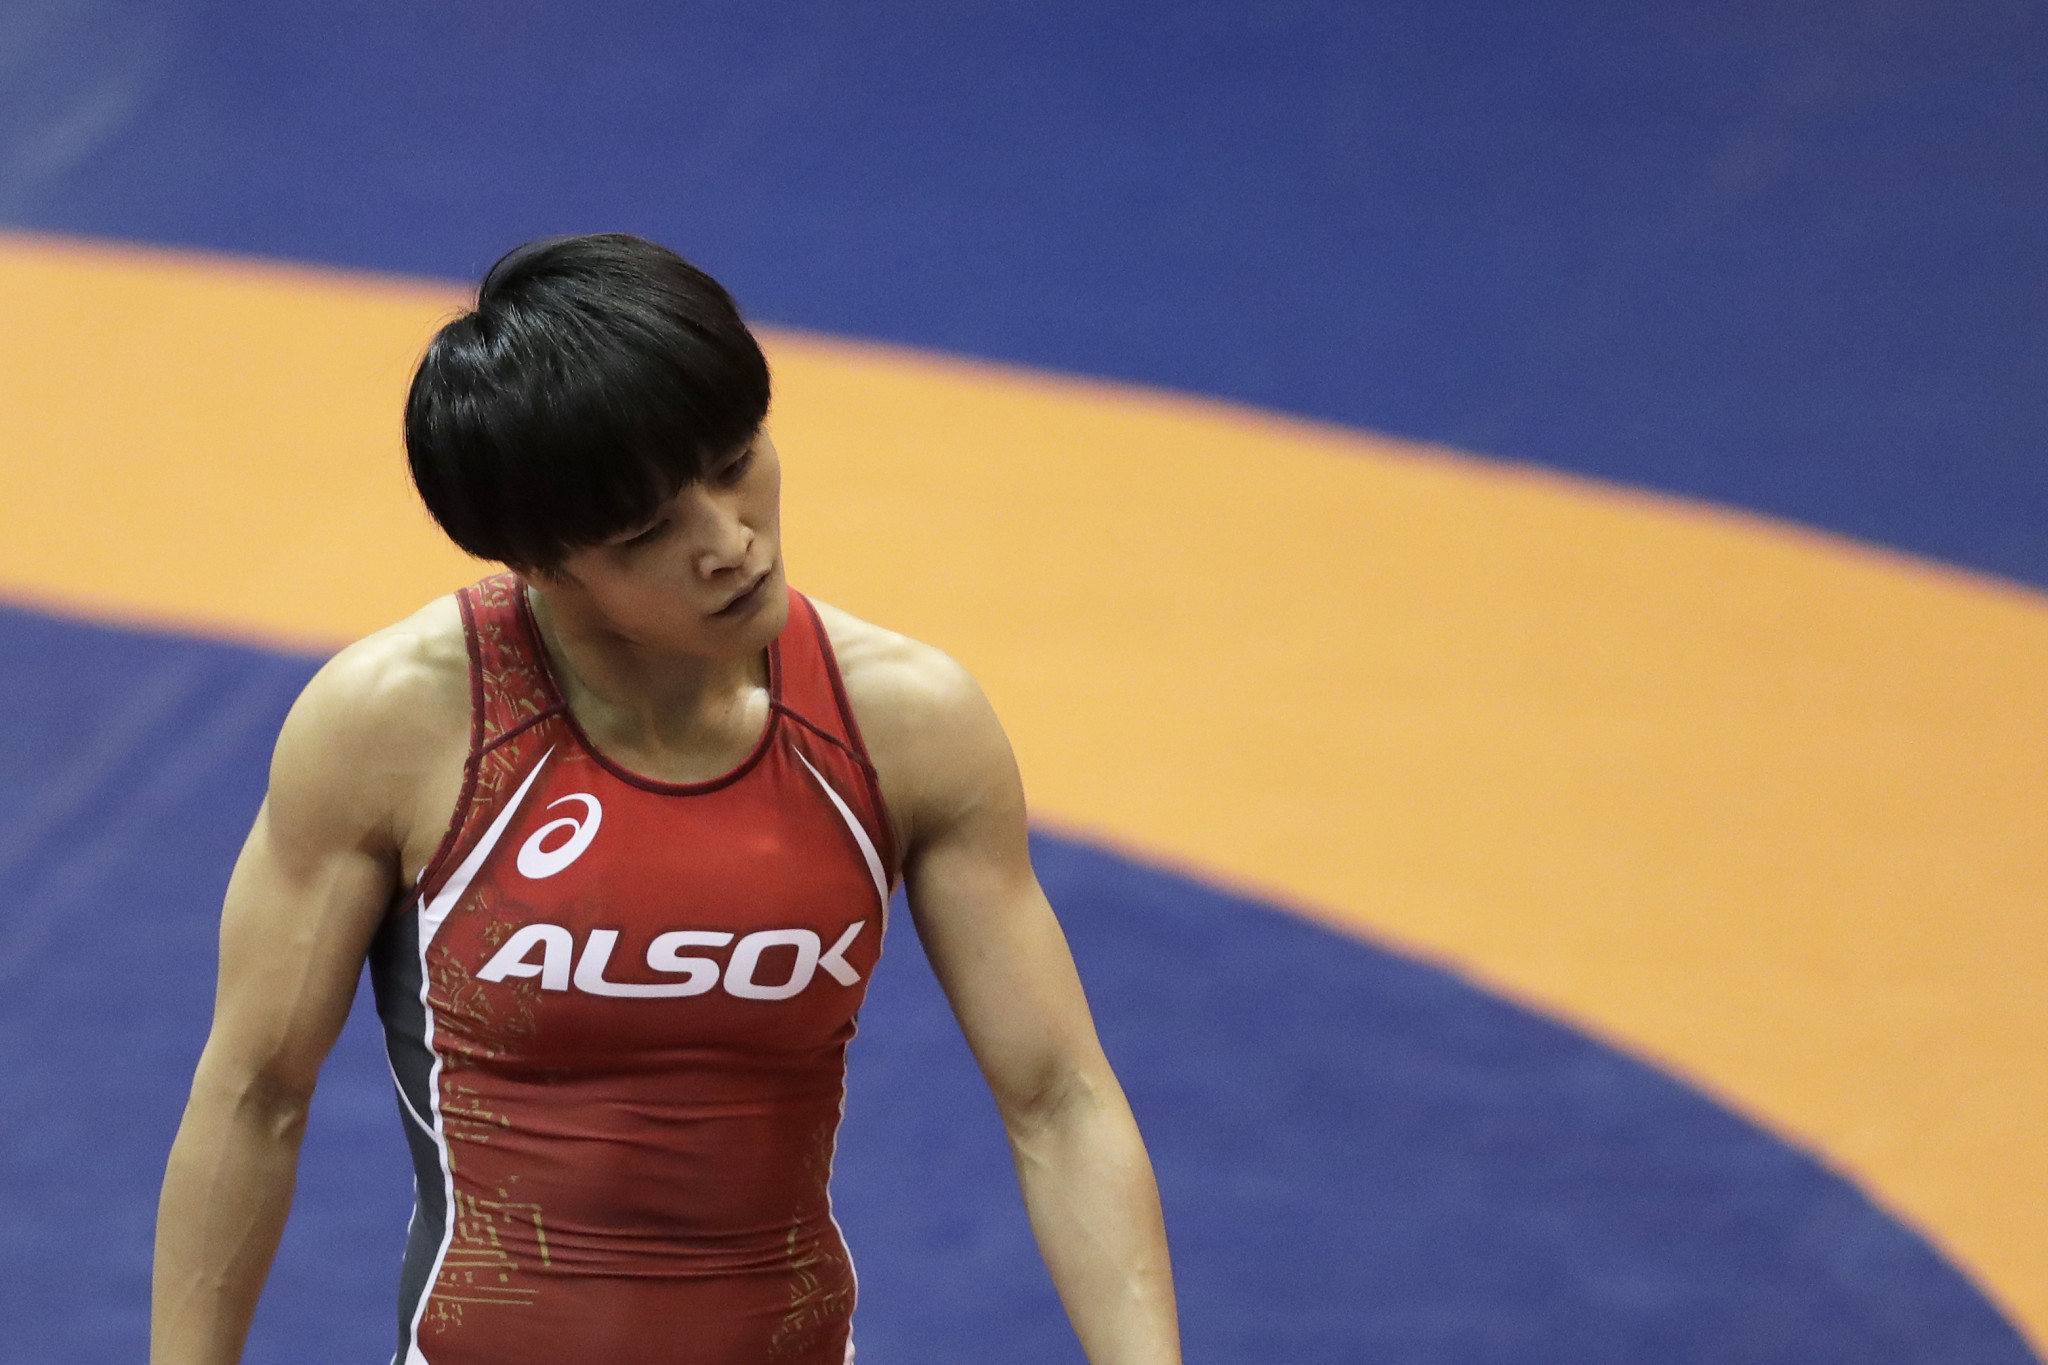 Japanese wrestling legend Icho ends bid for fifth consecutive Olympic gold at Tokyo 2020